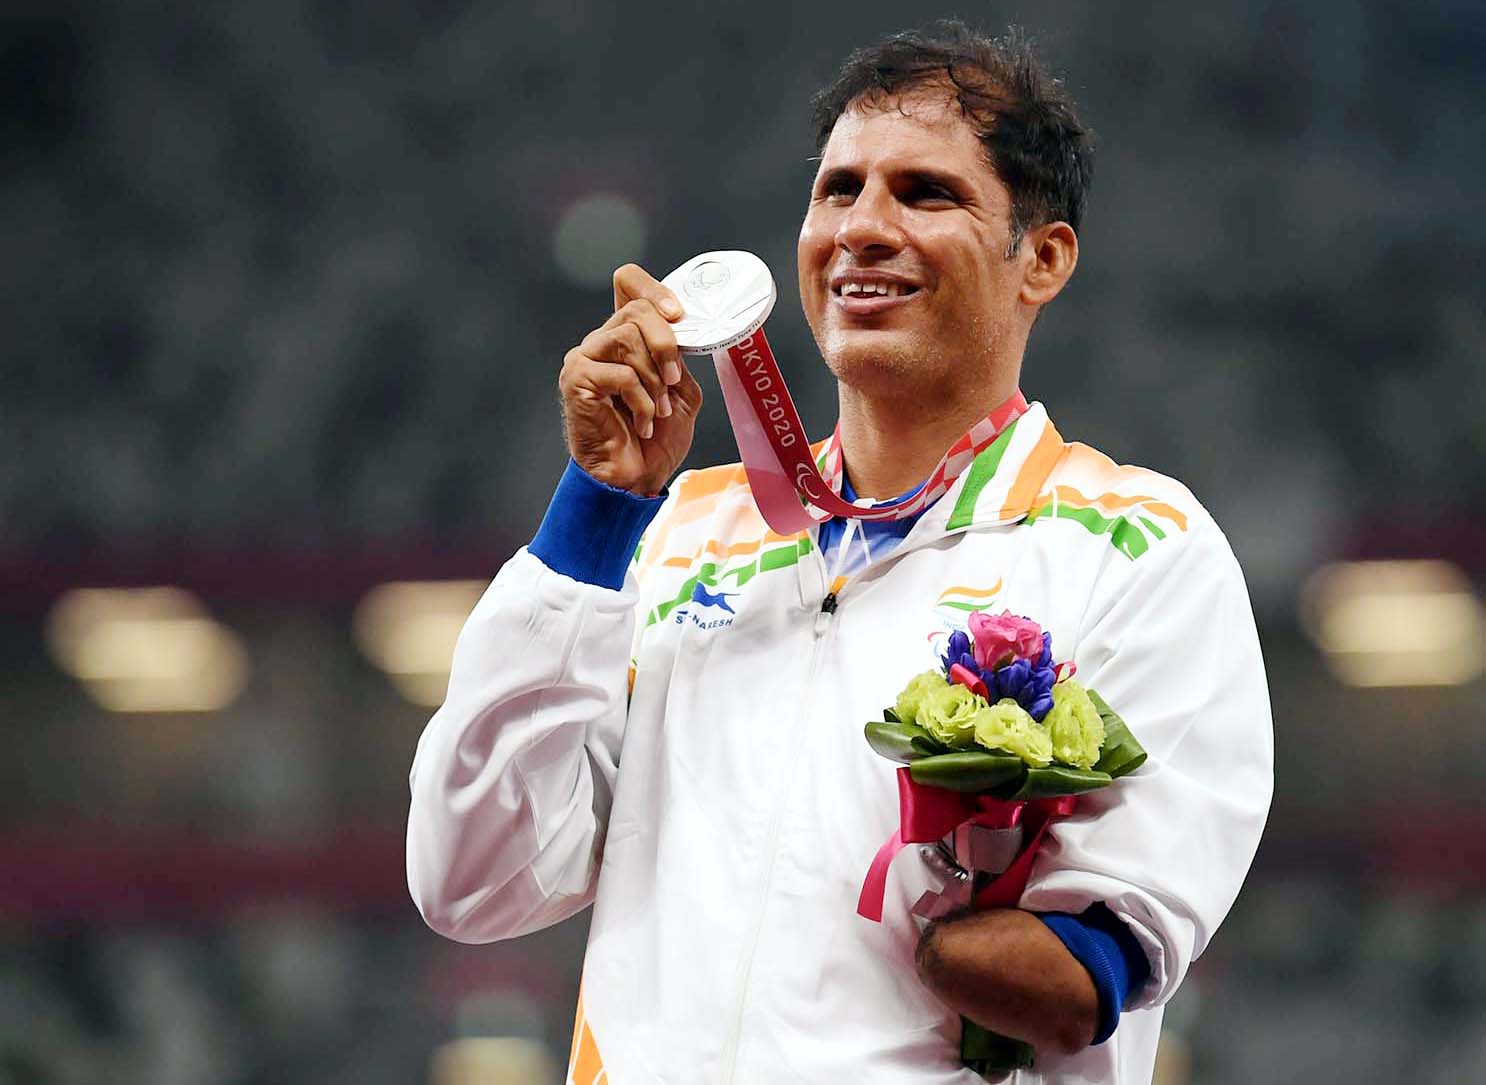 Indian javelin thrower Devendera Jhanjharia with his silver medal at the Tokyo Paralympics on 30 August 2021.